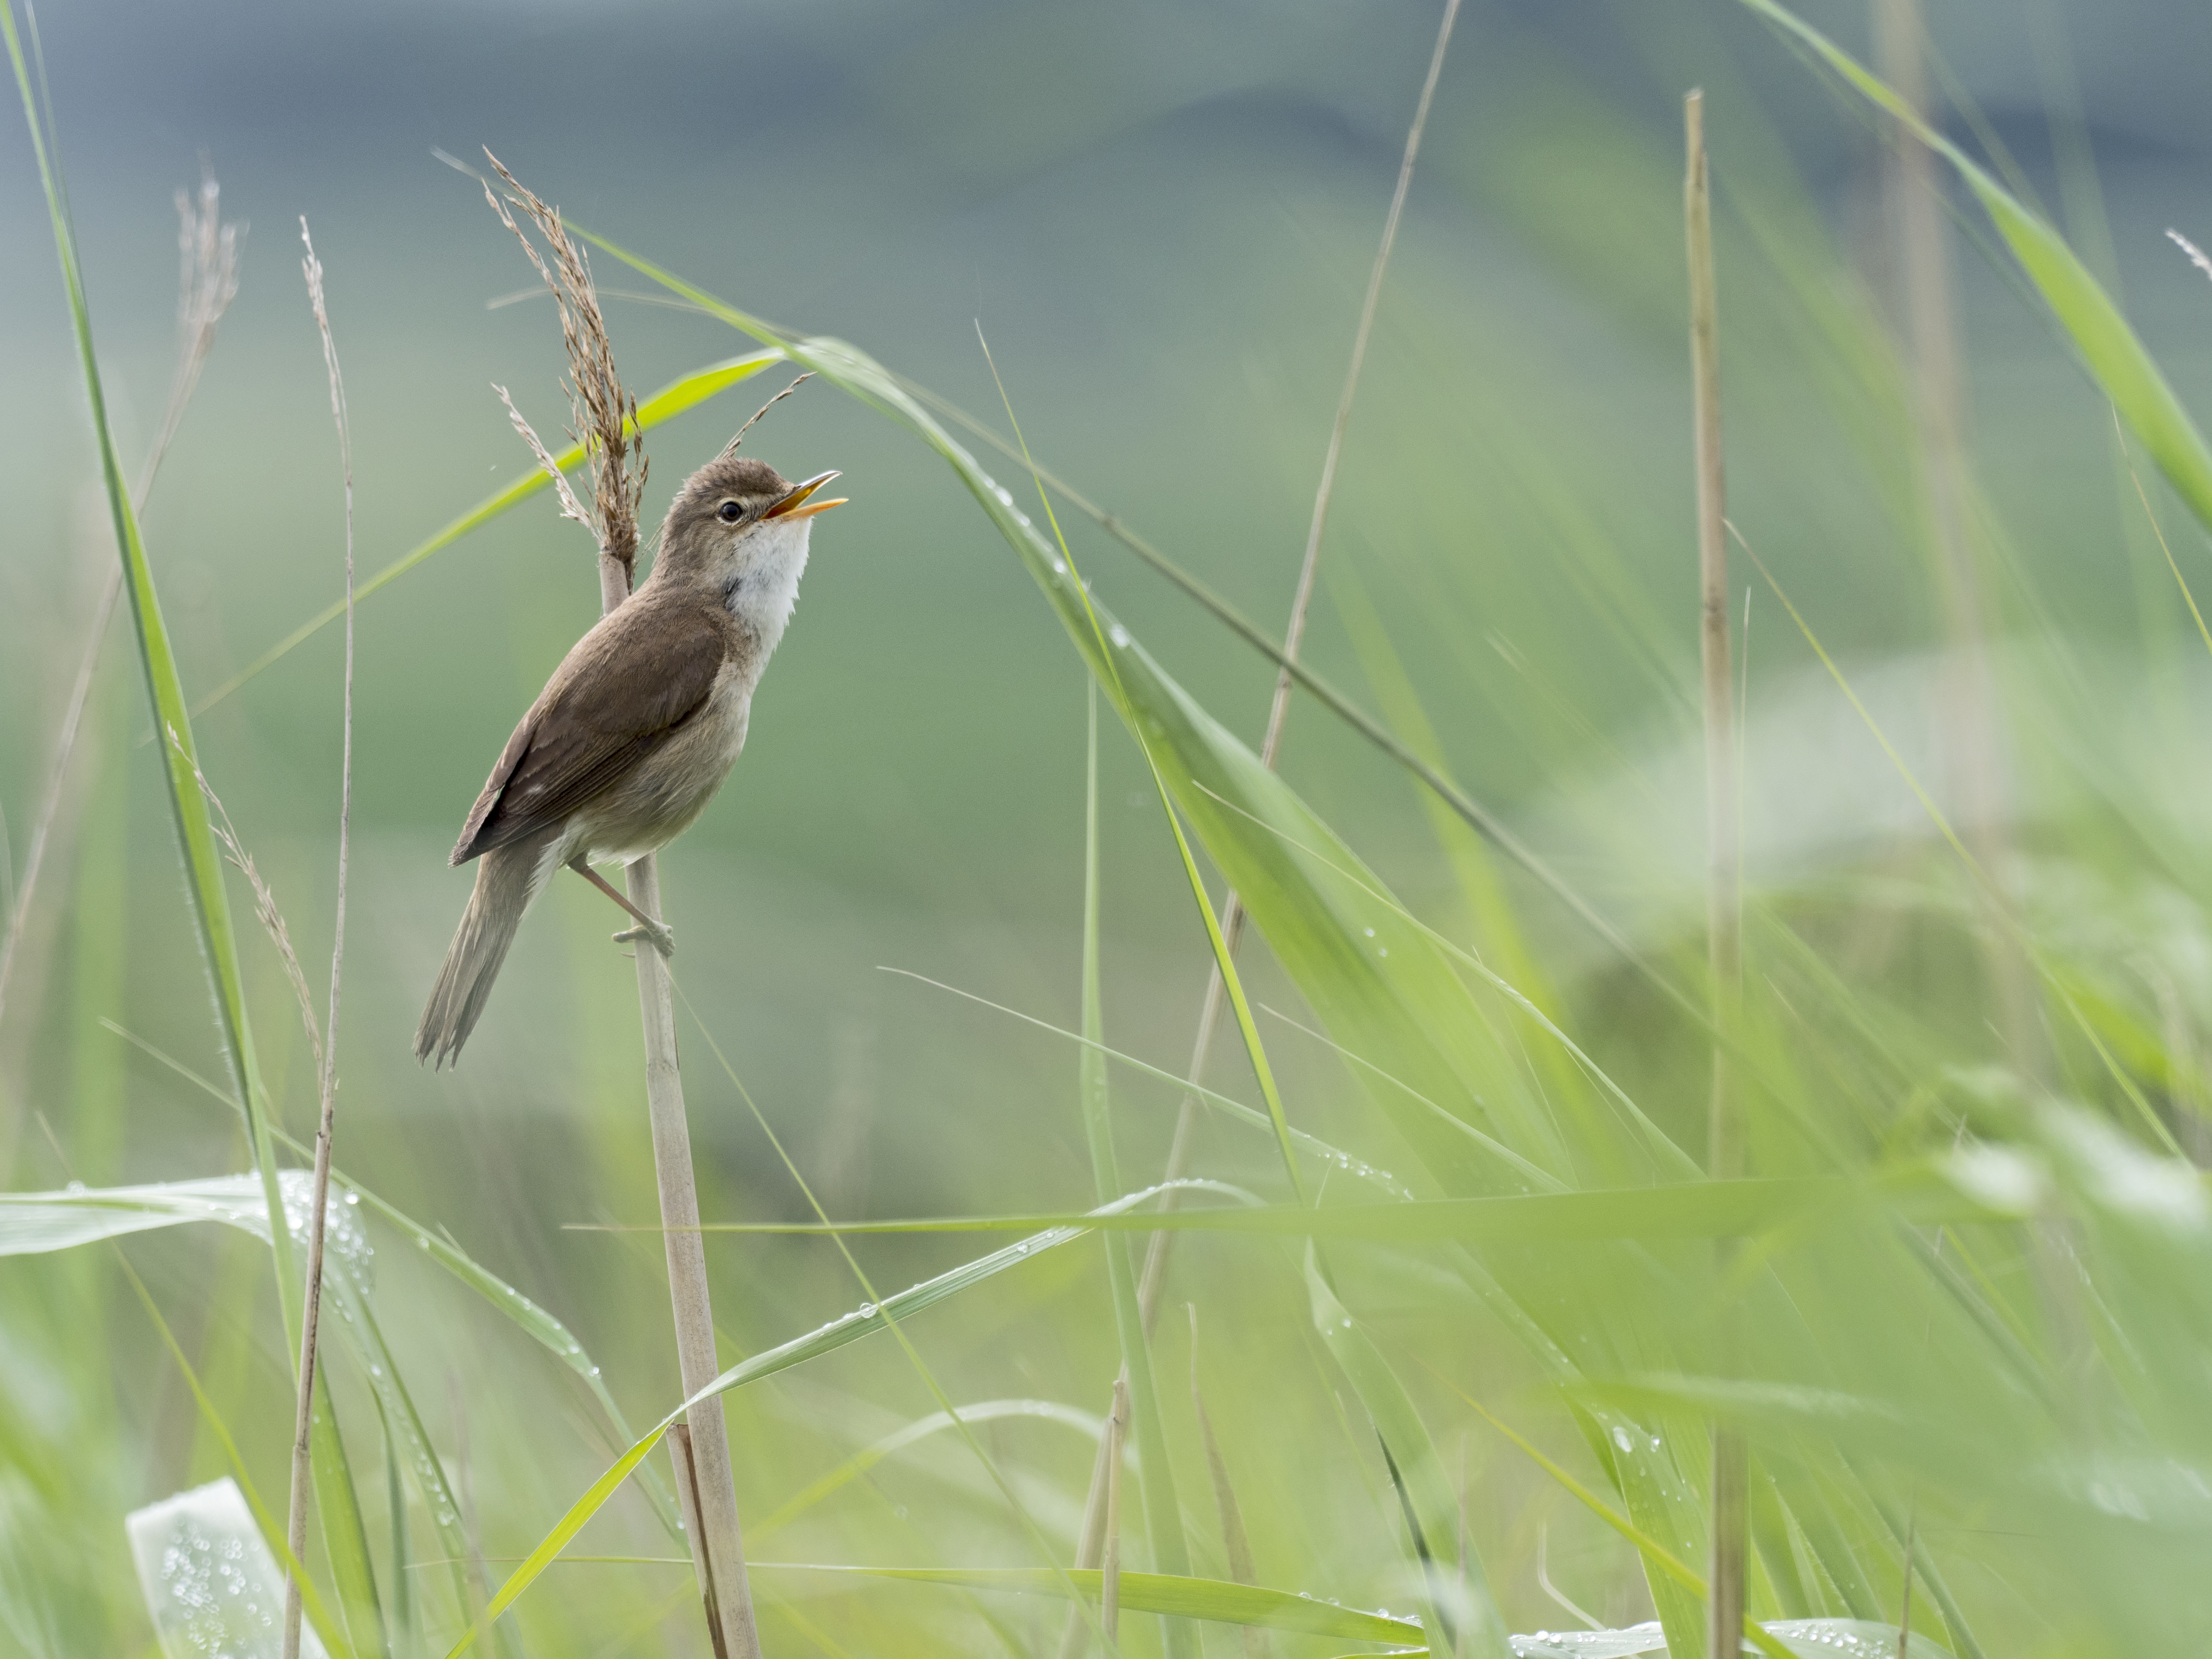 A small bird sitting on a blade of grass in a field.